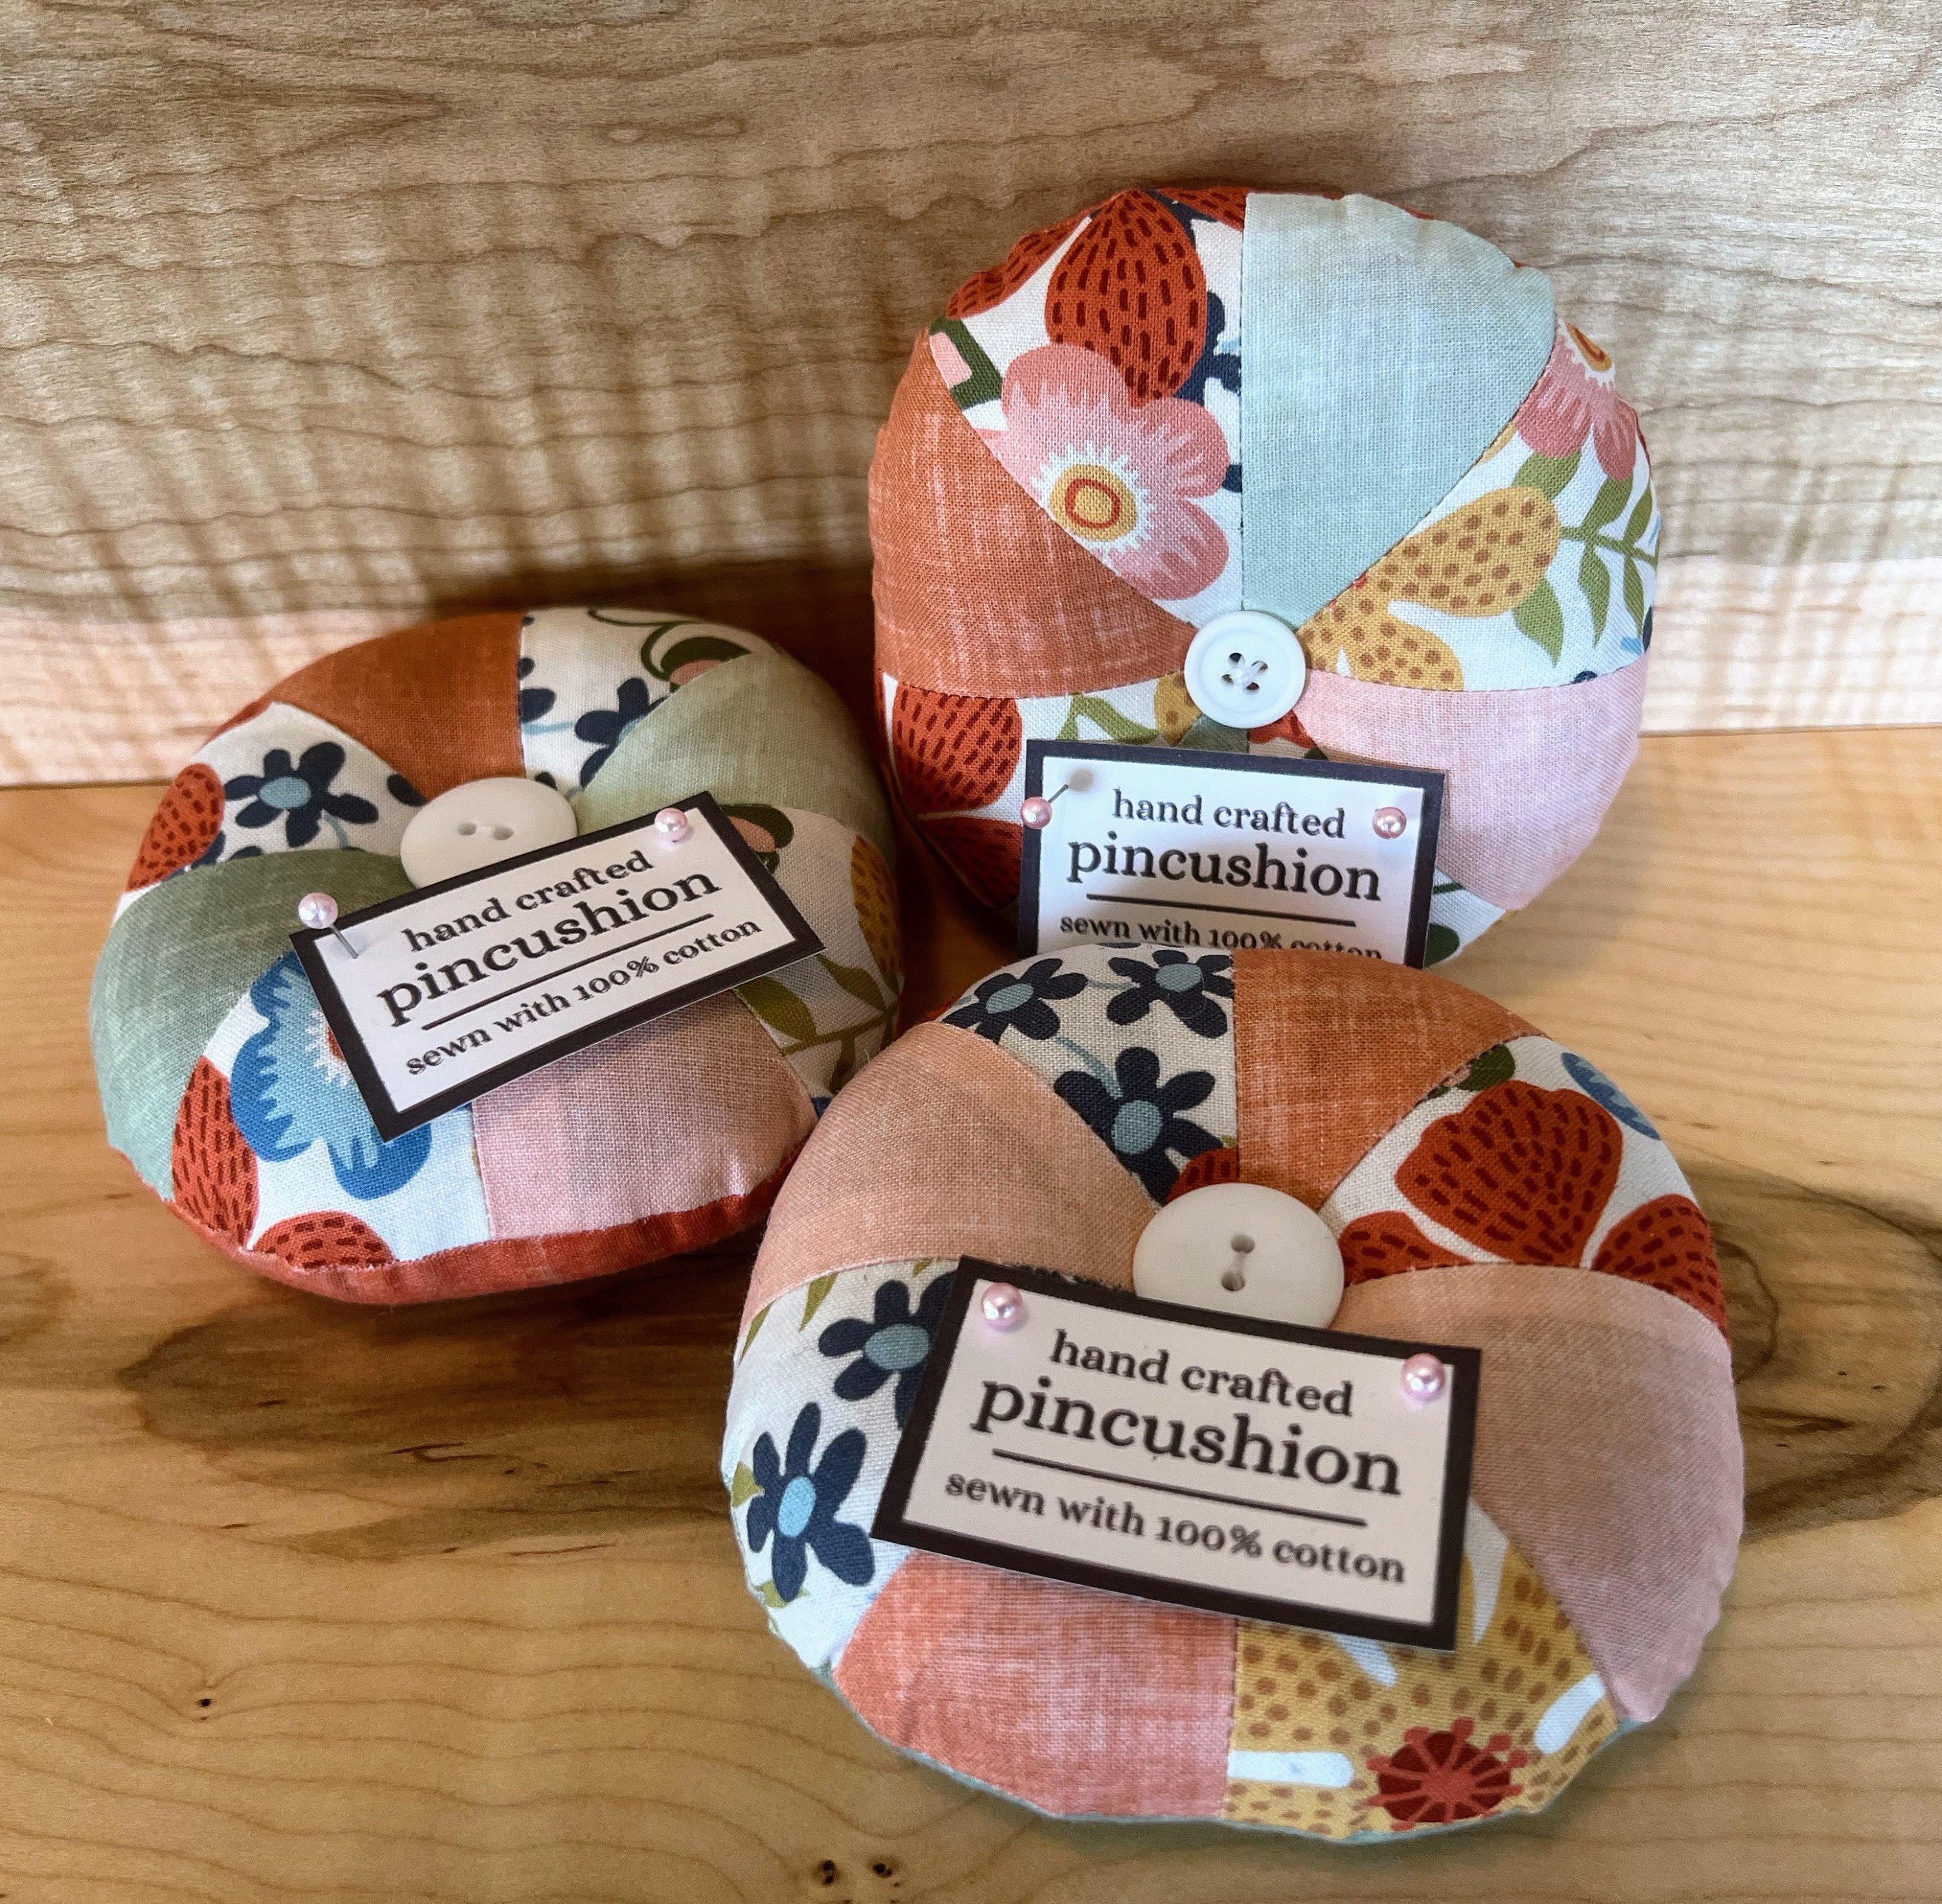  Finely Ground Walnut Nut Shells Perfect Pincushion Filling, DIY  Pincushion, Lavender Scented, 2 packs of 12 oz each : Arts, Crafts & Sewing